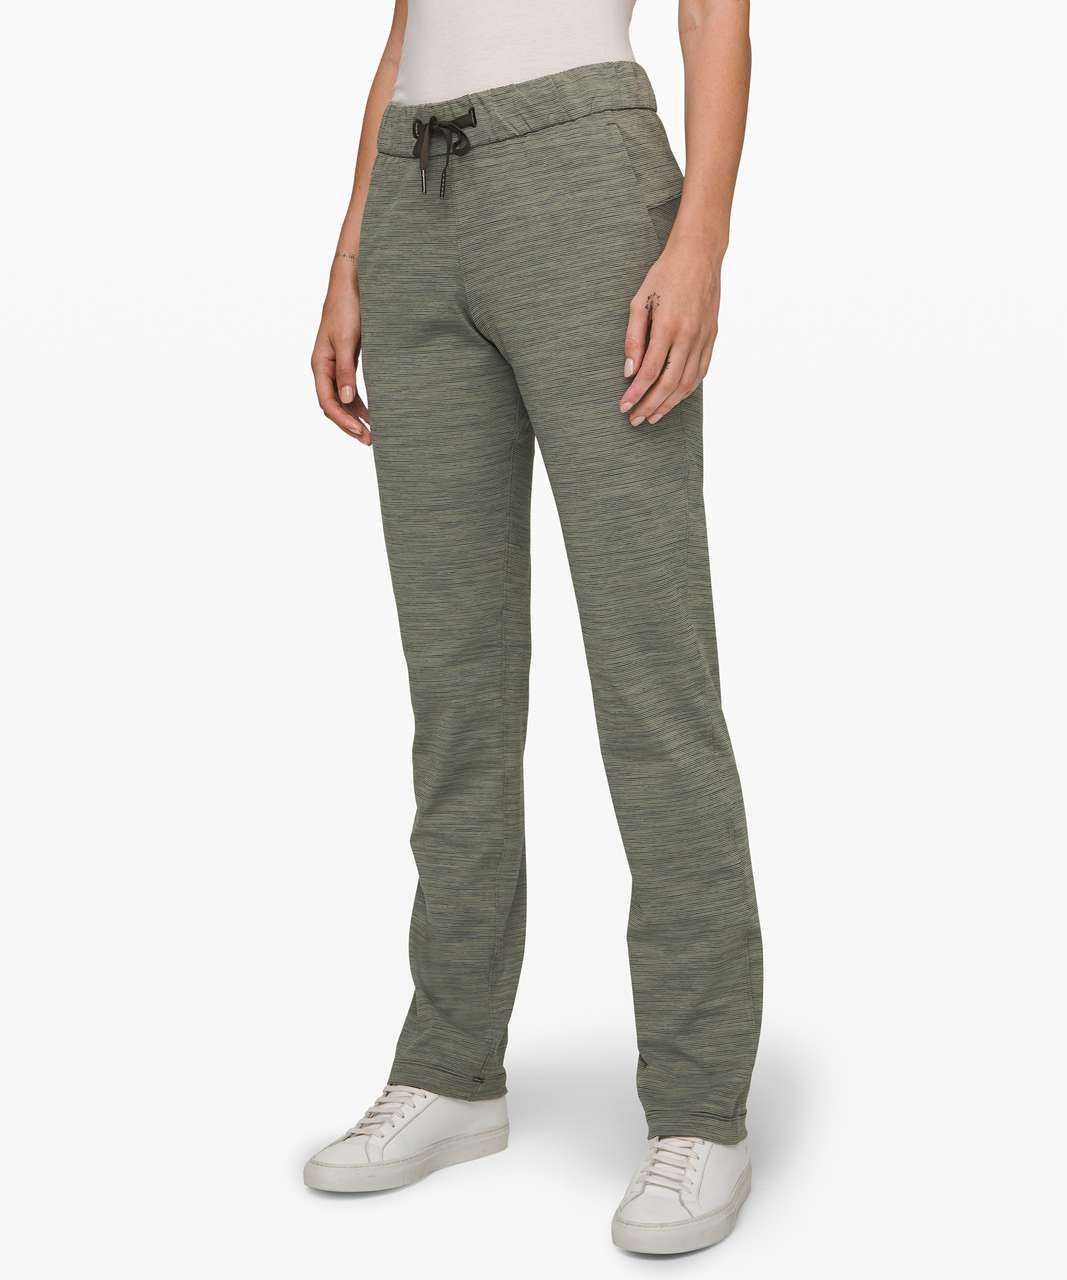 Lululemon On the Fly Pant Full Length - Wee Are From Space Sage